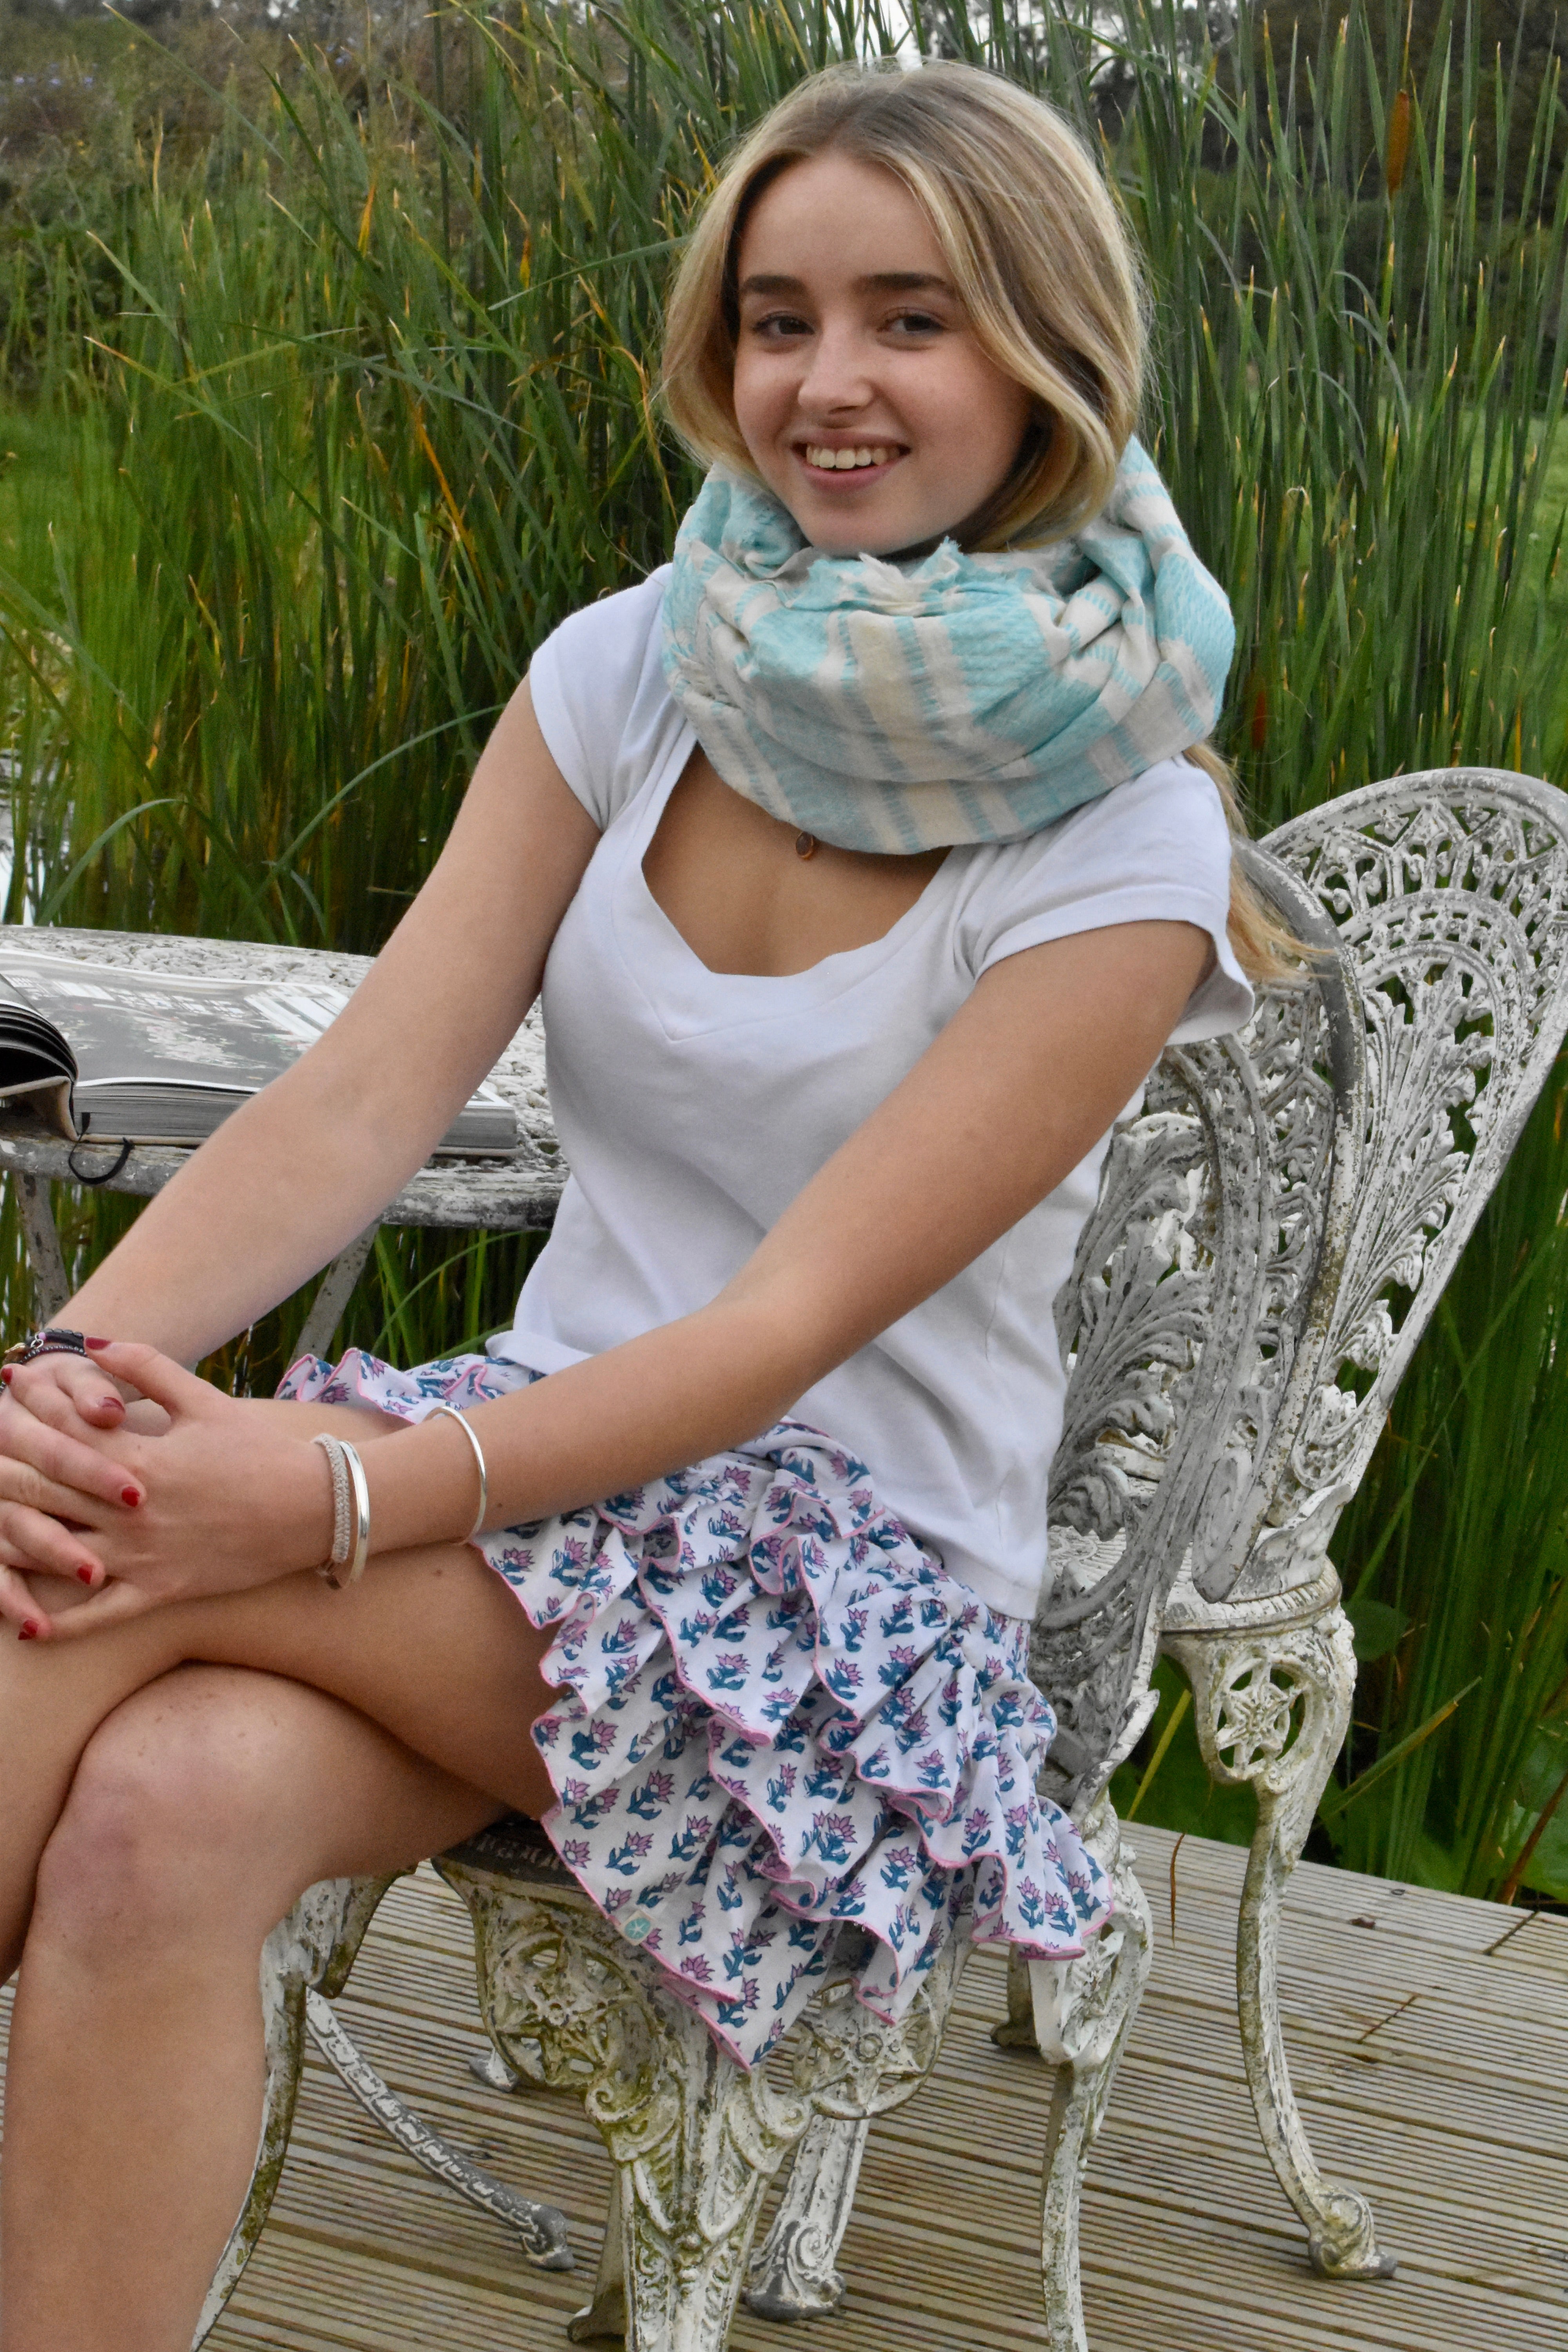 Hand Woven Cotton Scarf - Turquoise and white